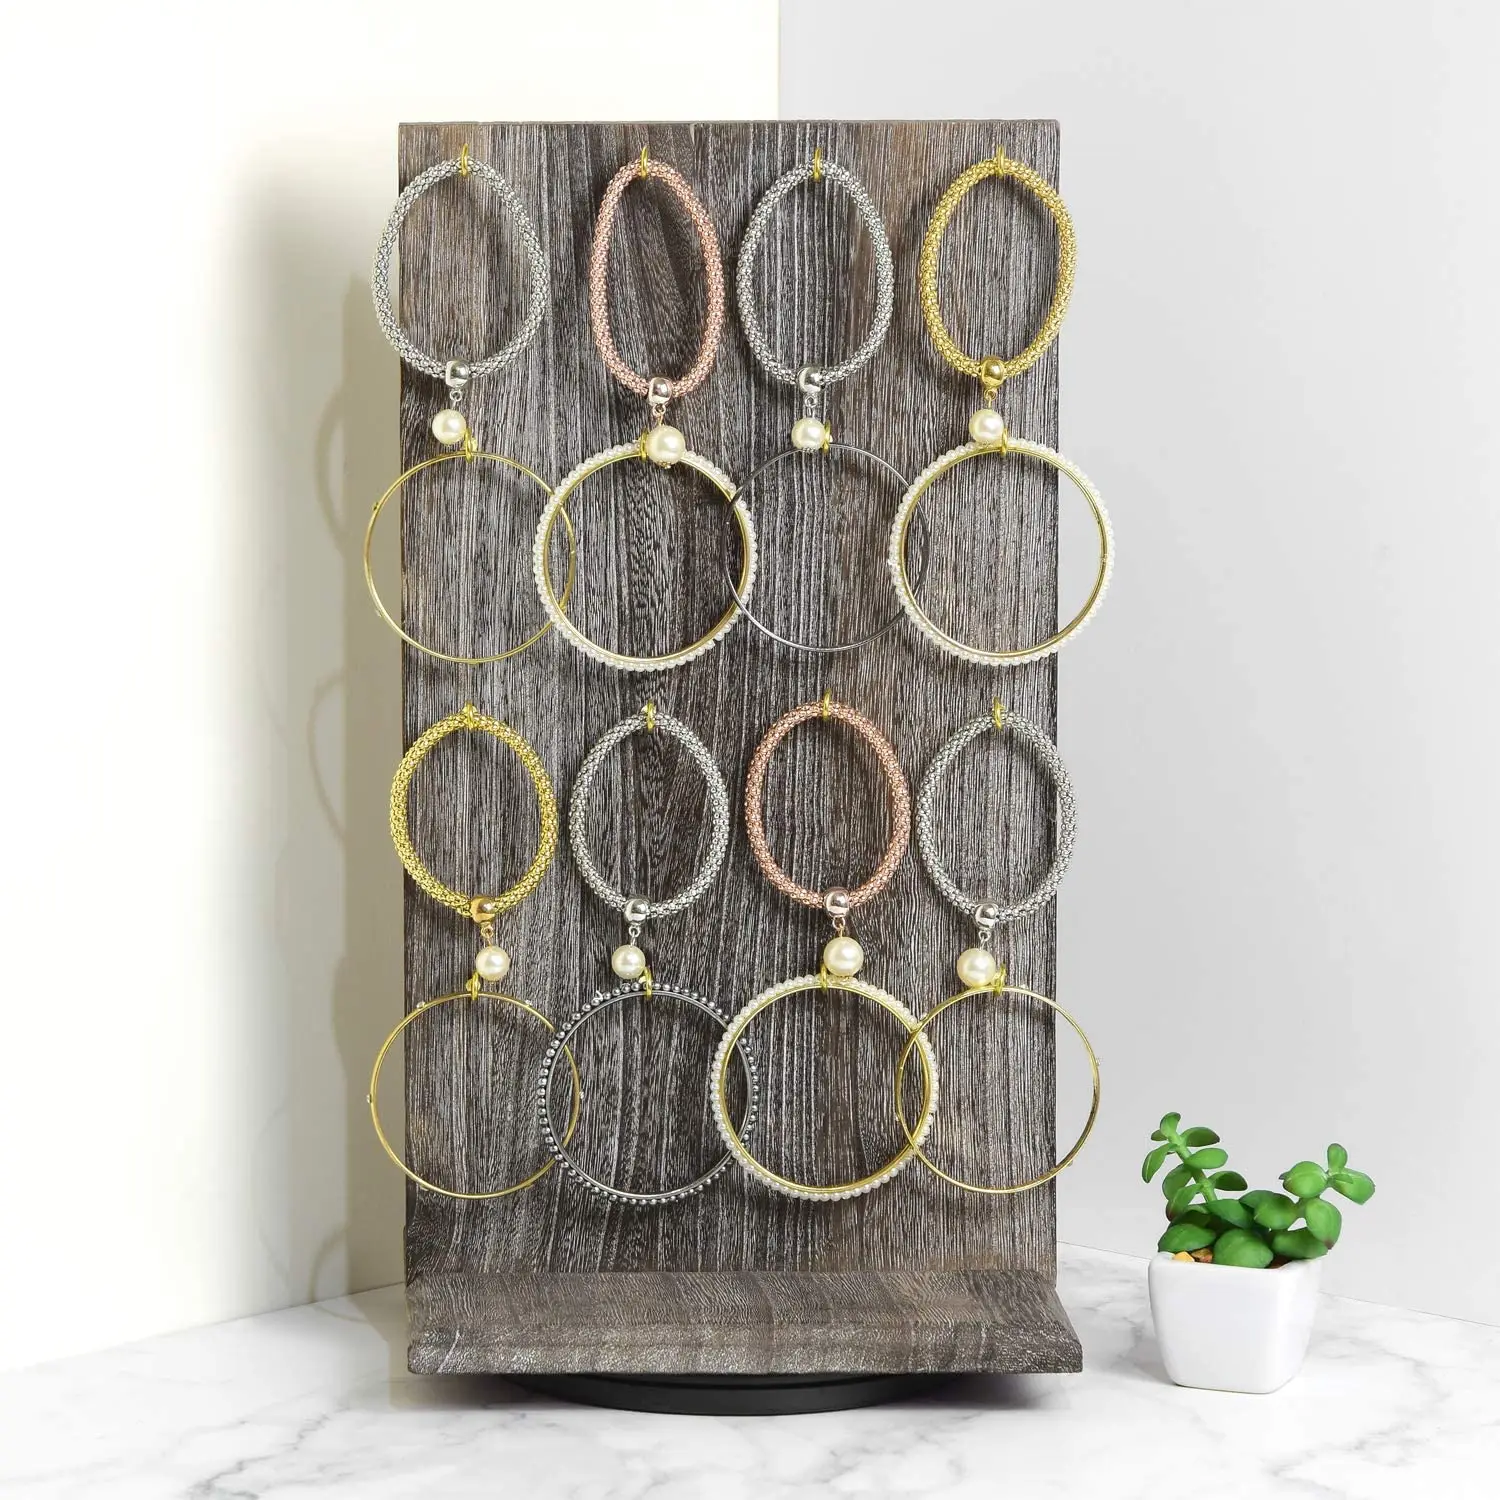 Two-Sided Rotating Rustic Wooden Jewelry Display Stand For Store, Earring Display with Hooks